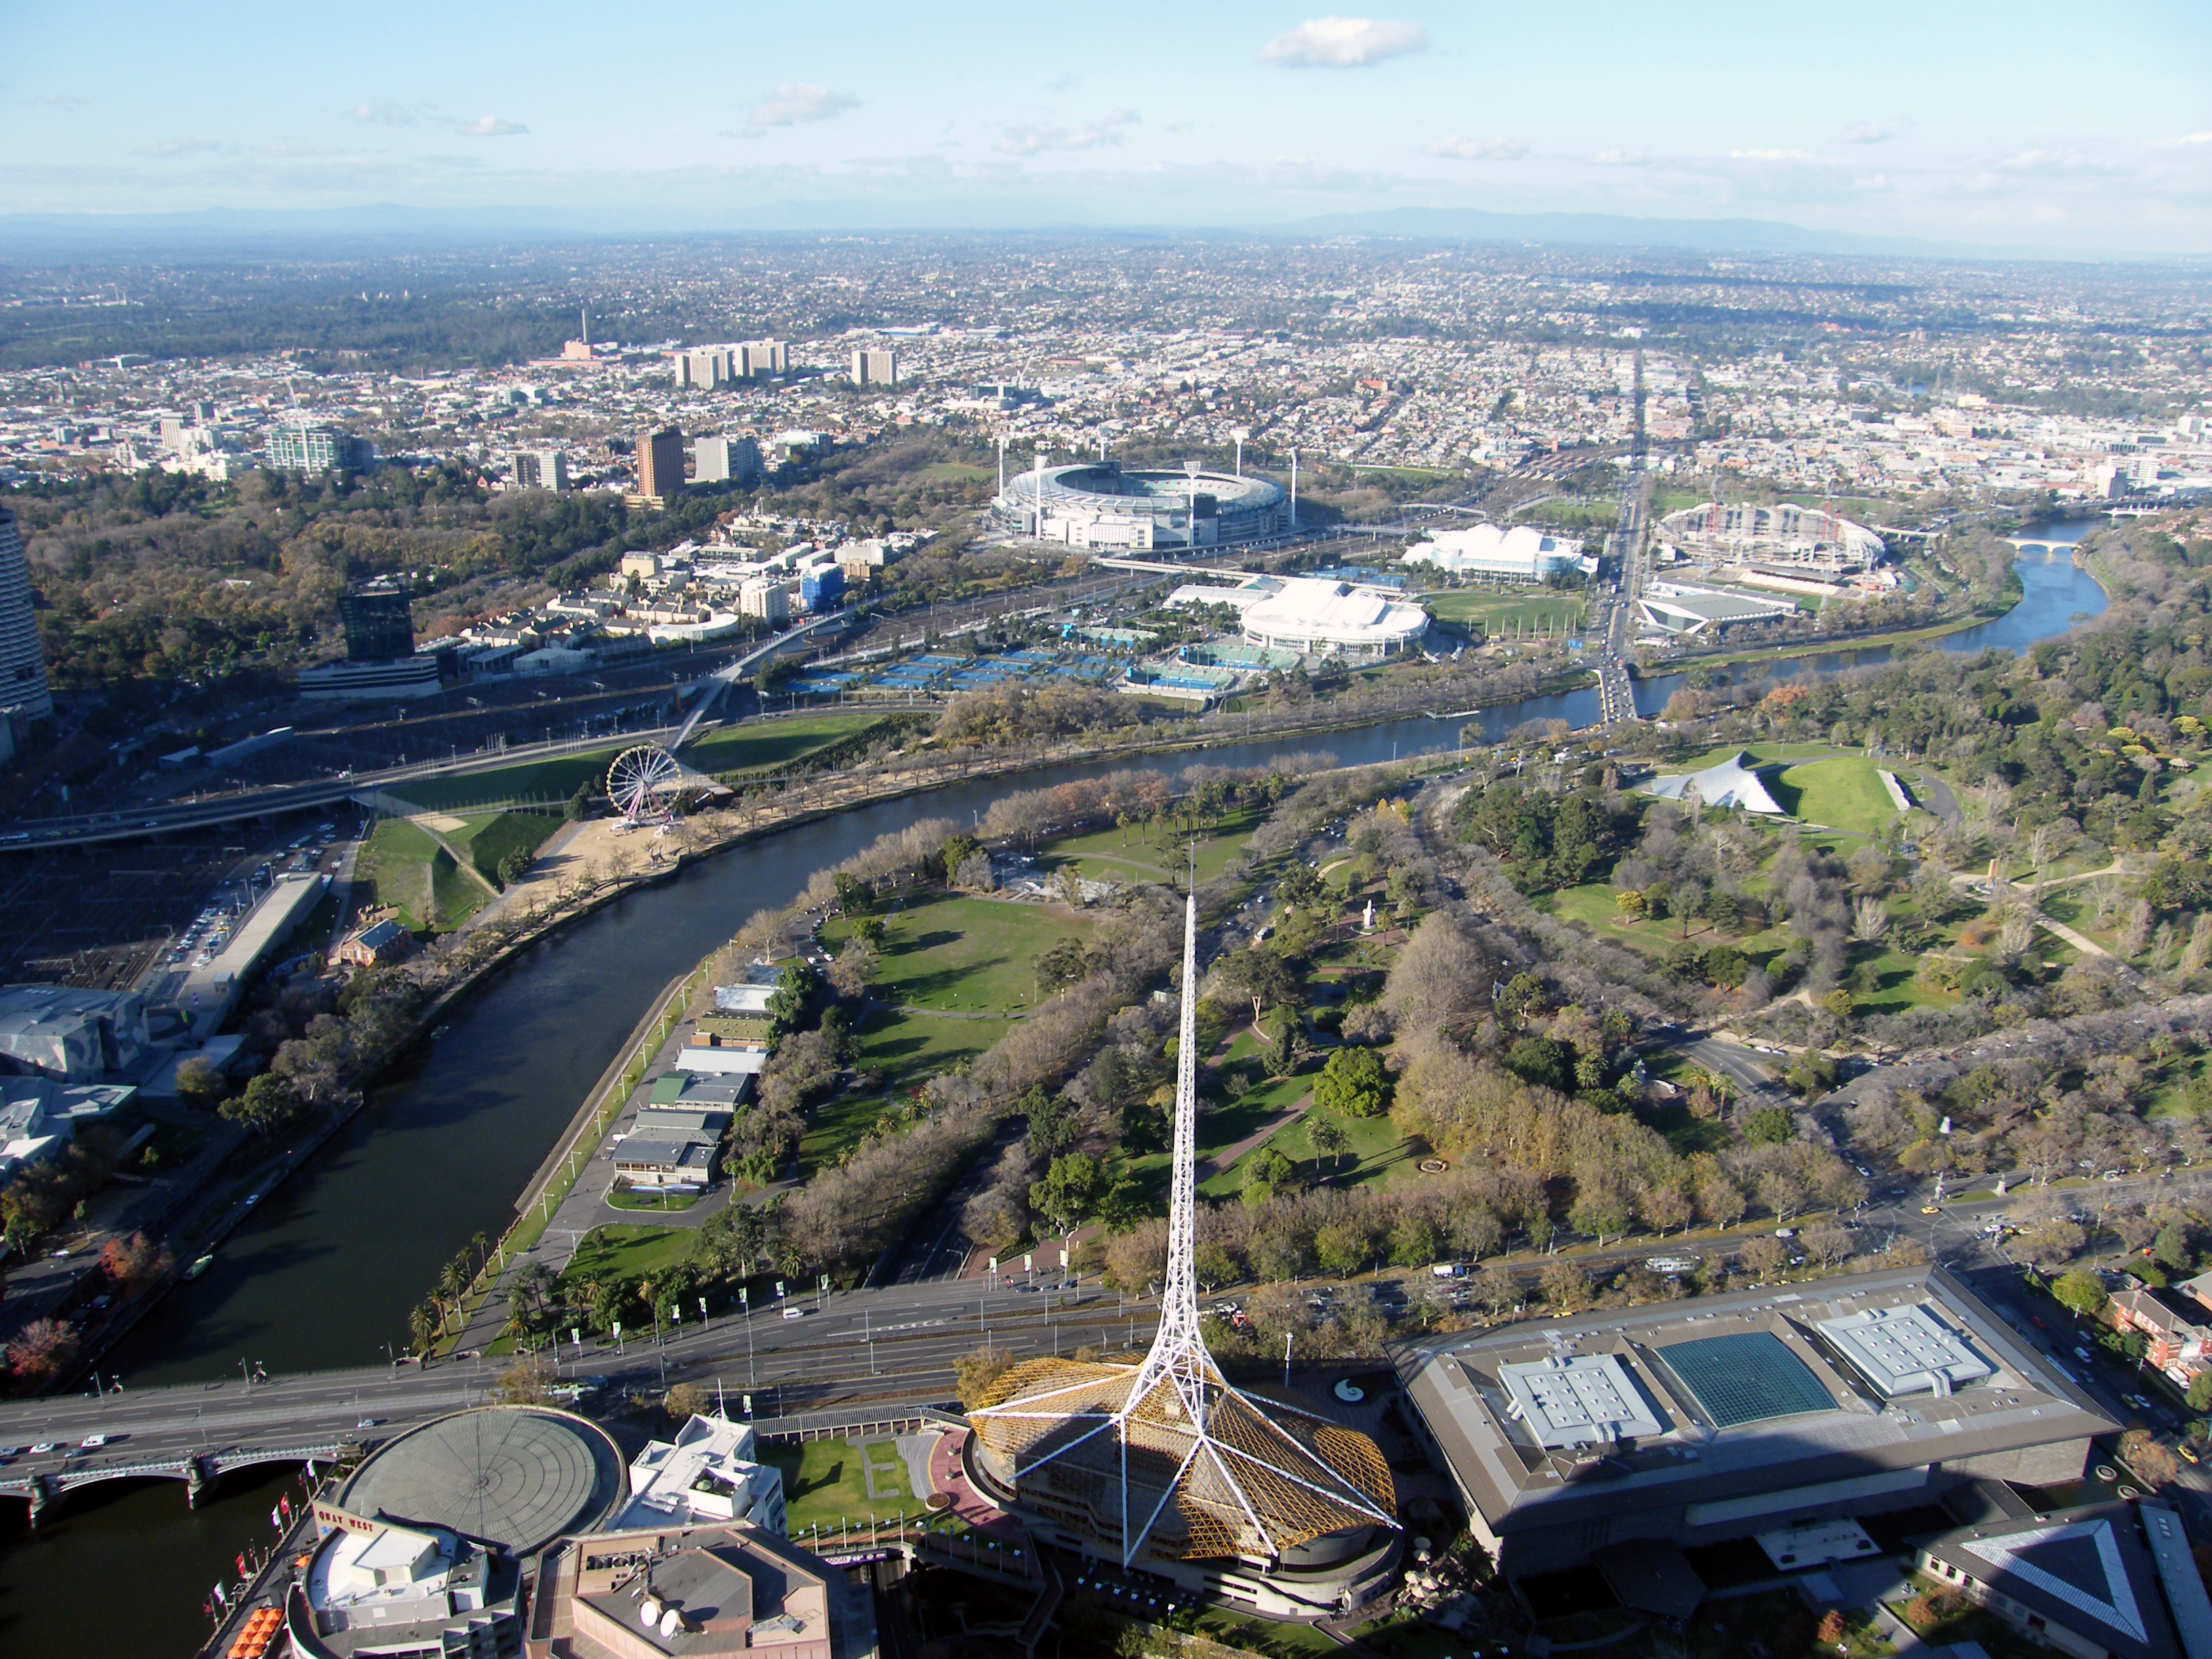 View of the Art Spire & the Yarra River from level 88 of the Eureka Skydeck